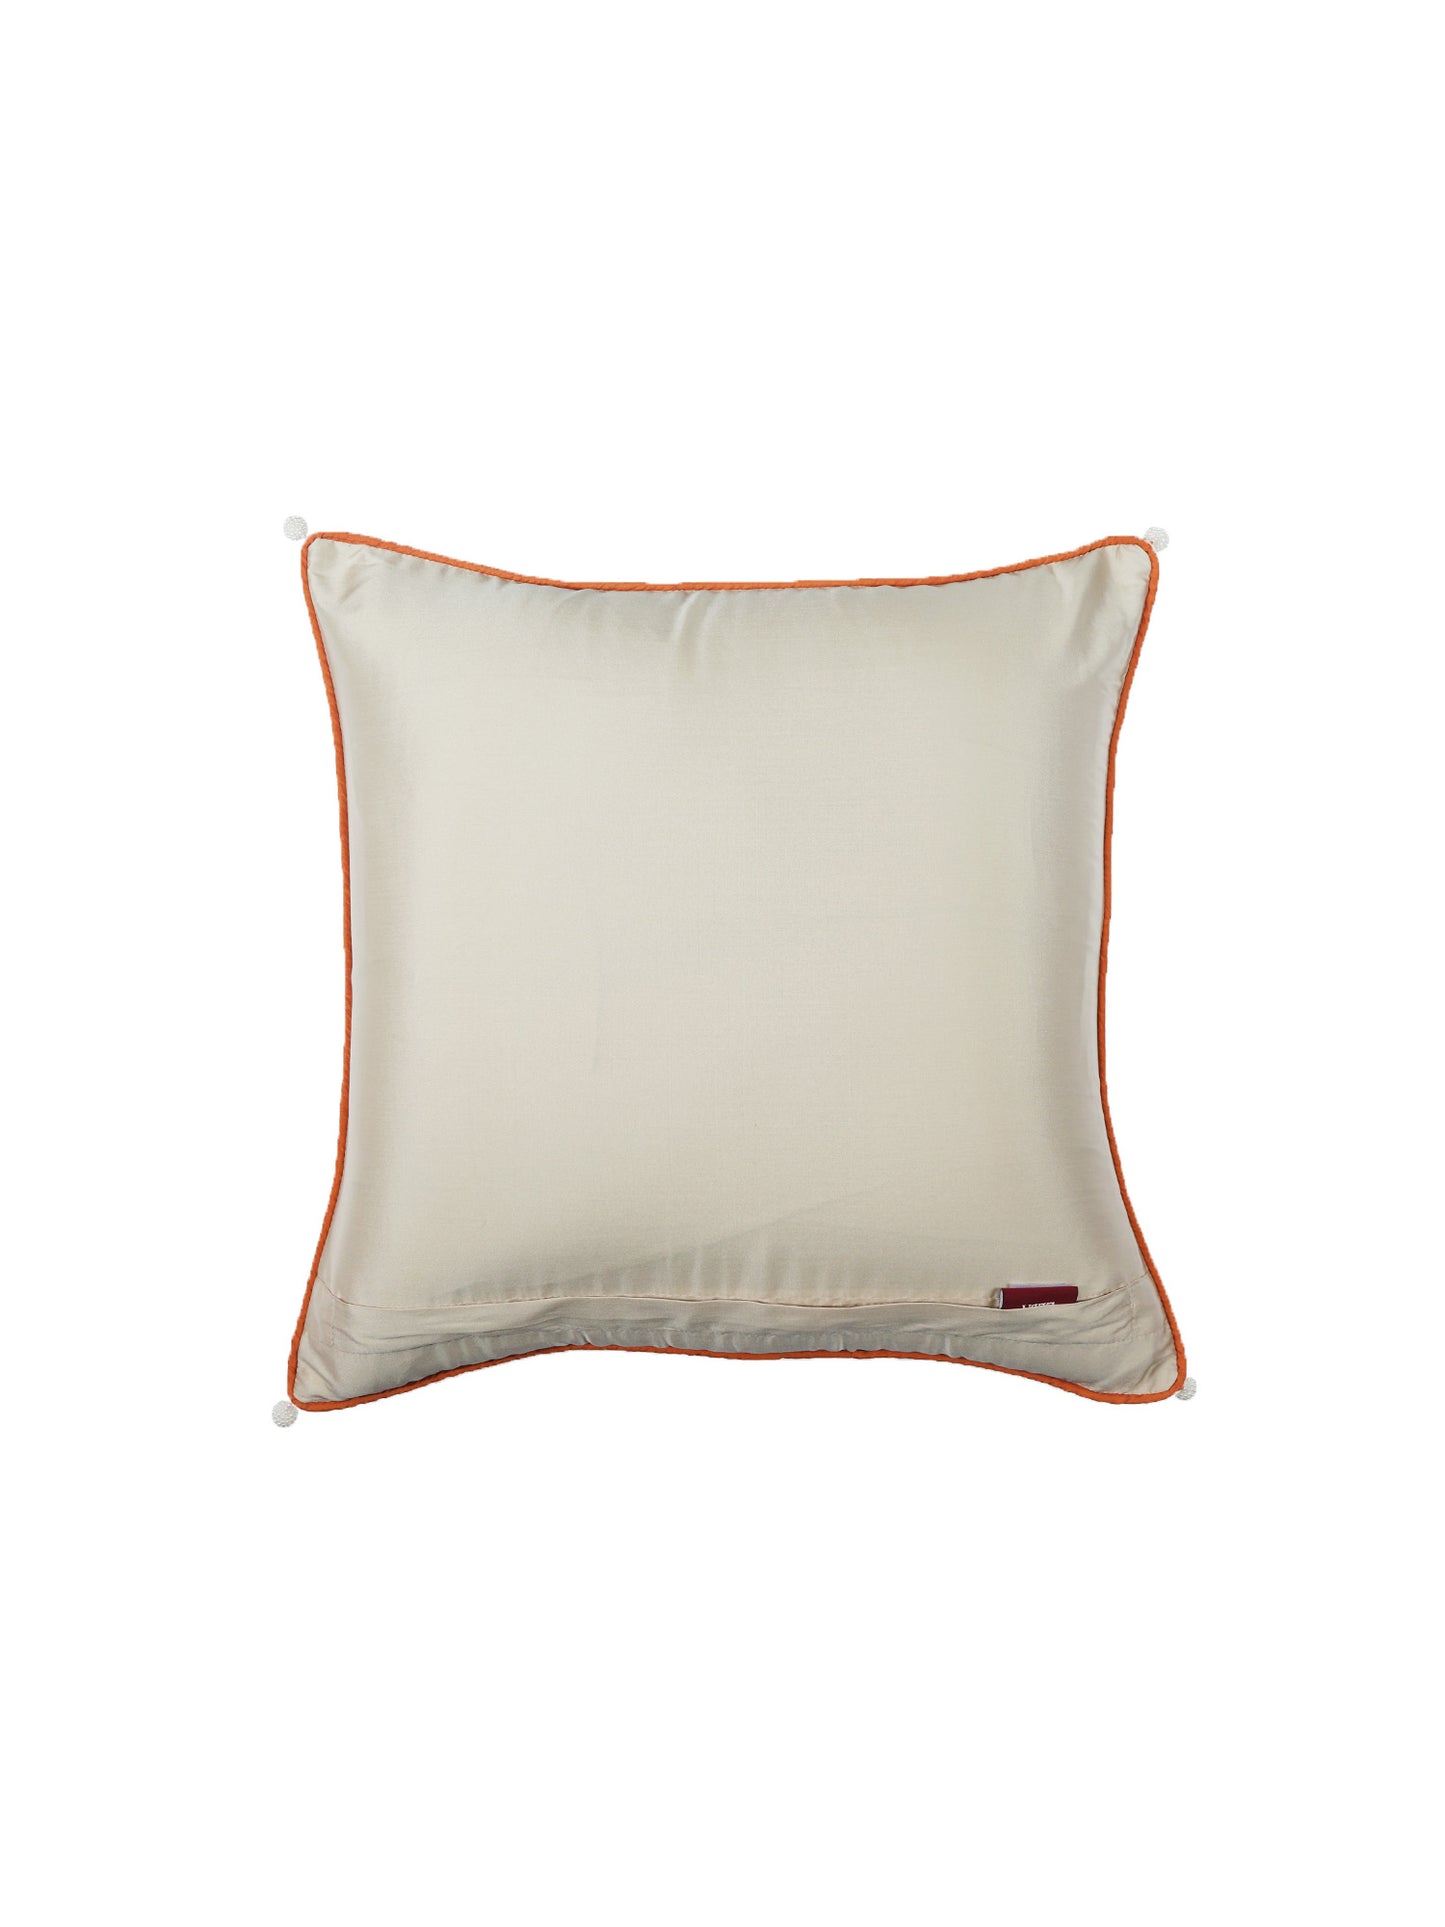 Cushion Cover for Sofa, Bed Varanasi Silk Motif with Cord Piping Off White - 16x16in(40x40cm) (Pack of 1)